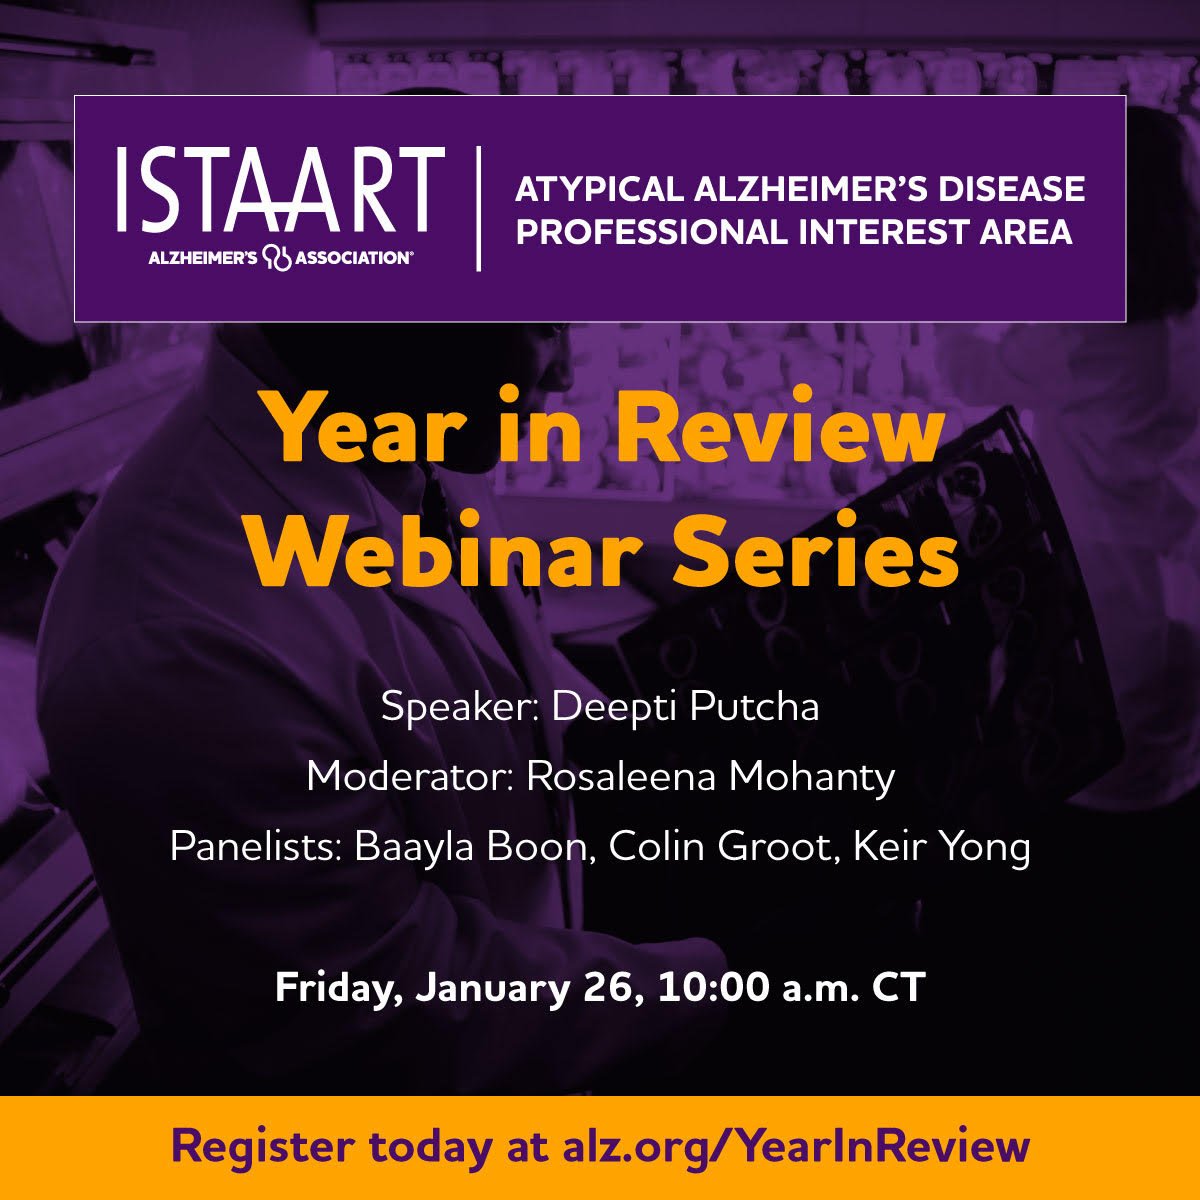 Three weeks until the @ISTAART @AtypicalPIA year in review! Come listen to Dr. Deepti Putcha as she discusses the past highlights and future directions of the field of atypical #AD. Register today! @RikOssenkoppele @NRGMayo @BaaylaB @Colin__Groot @KeirYong @Rosaleena_M